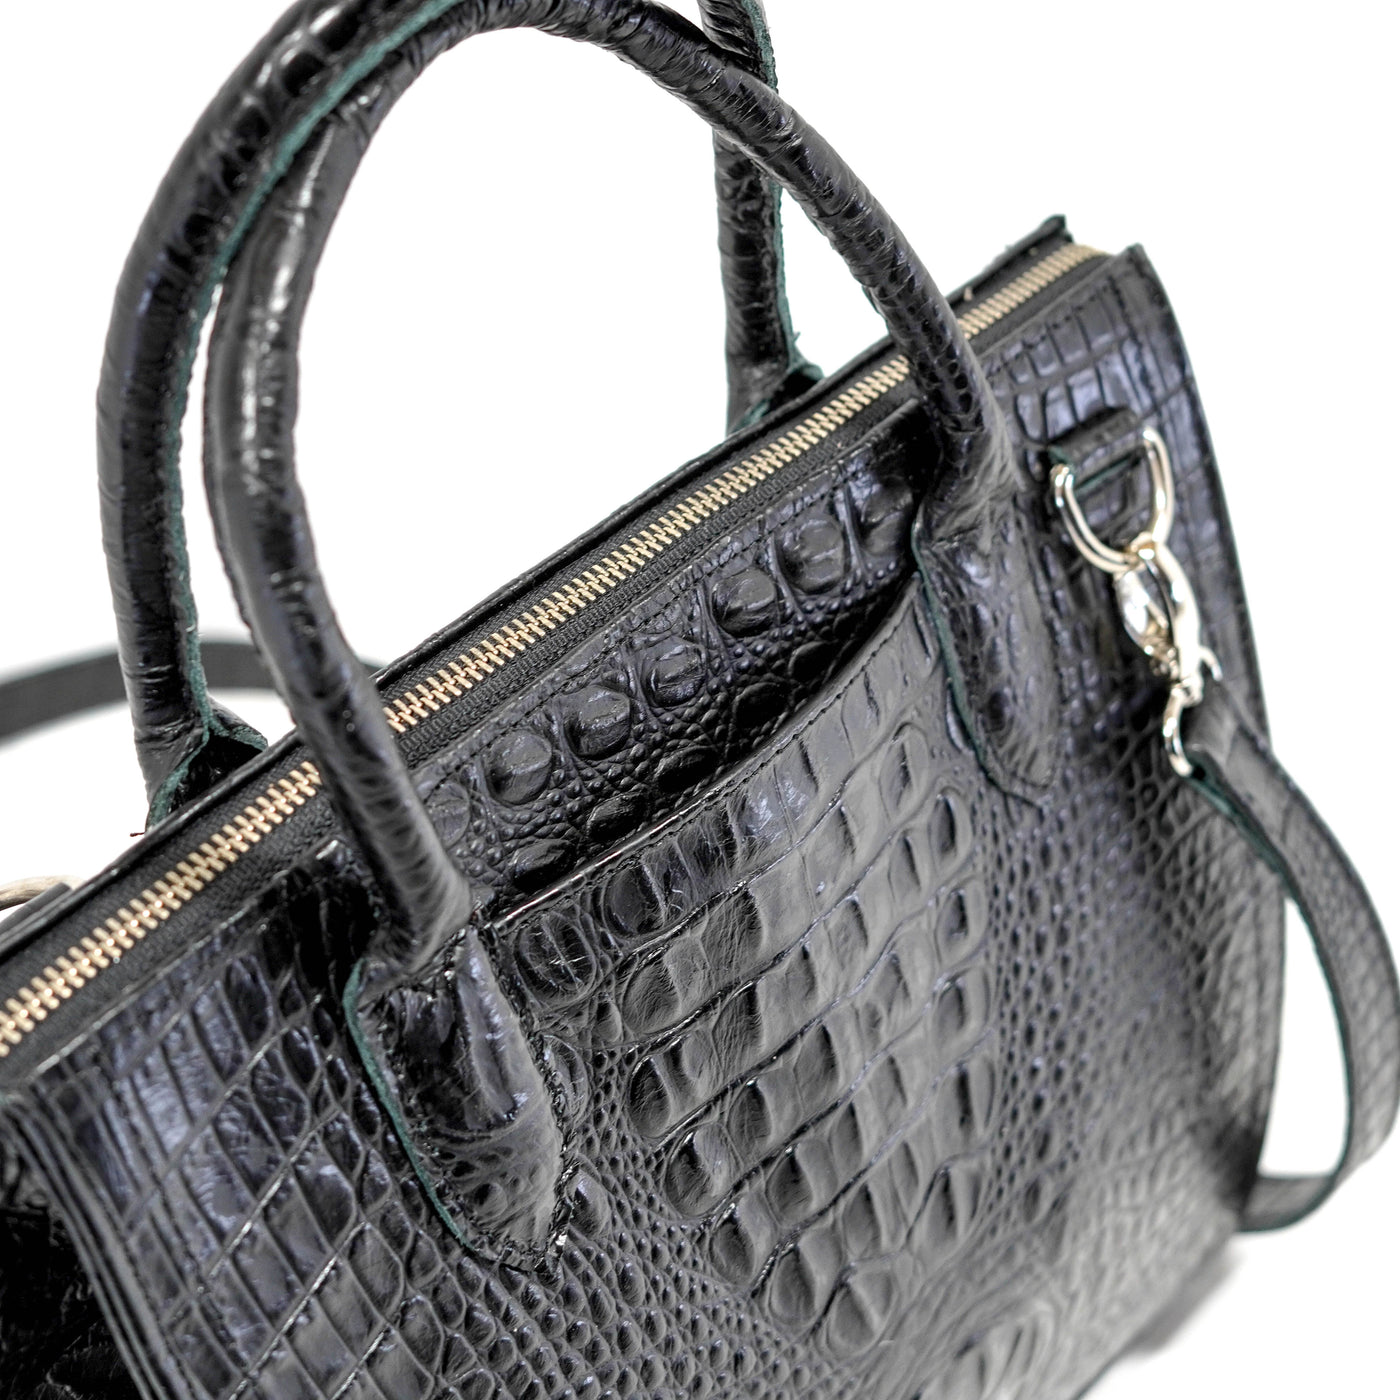 The Opry - All Embossed w/ Onyx Croc-The Opry-Western-Cowhide-Bags-Handmade-Products-Gifts-Dancing Cactus Designs